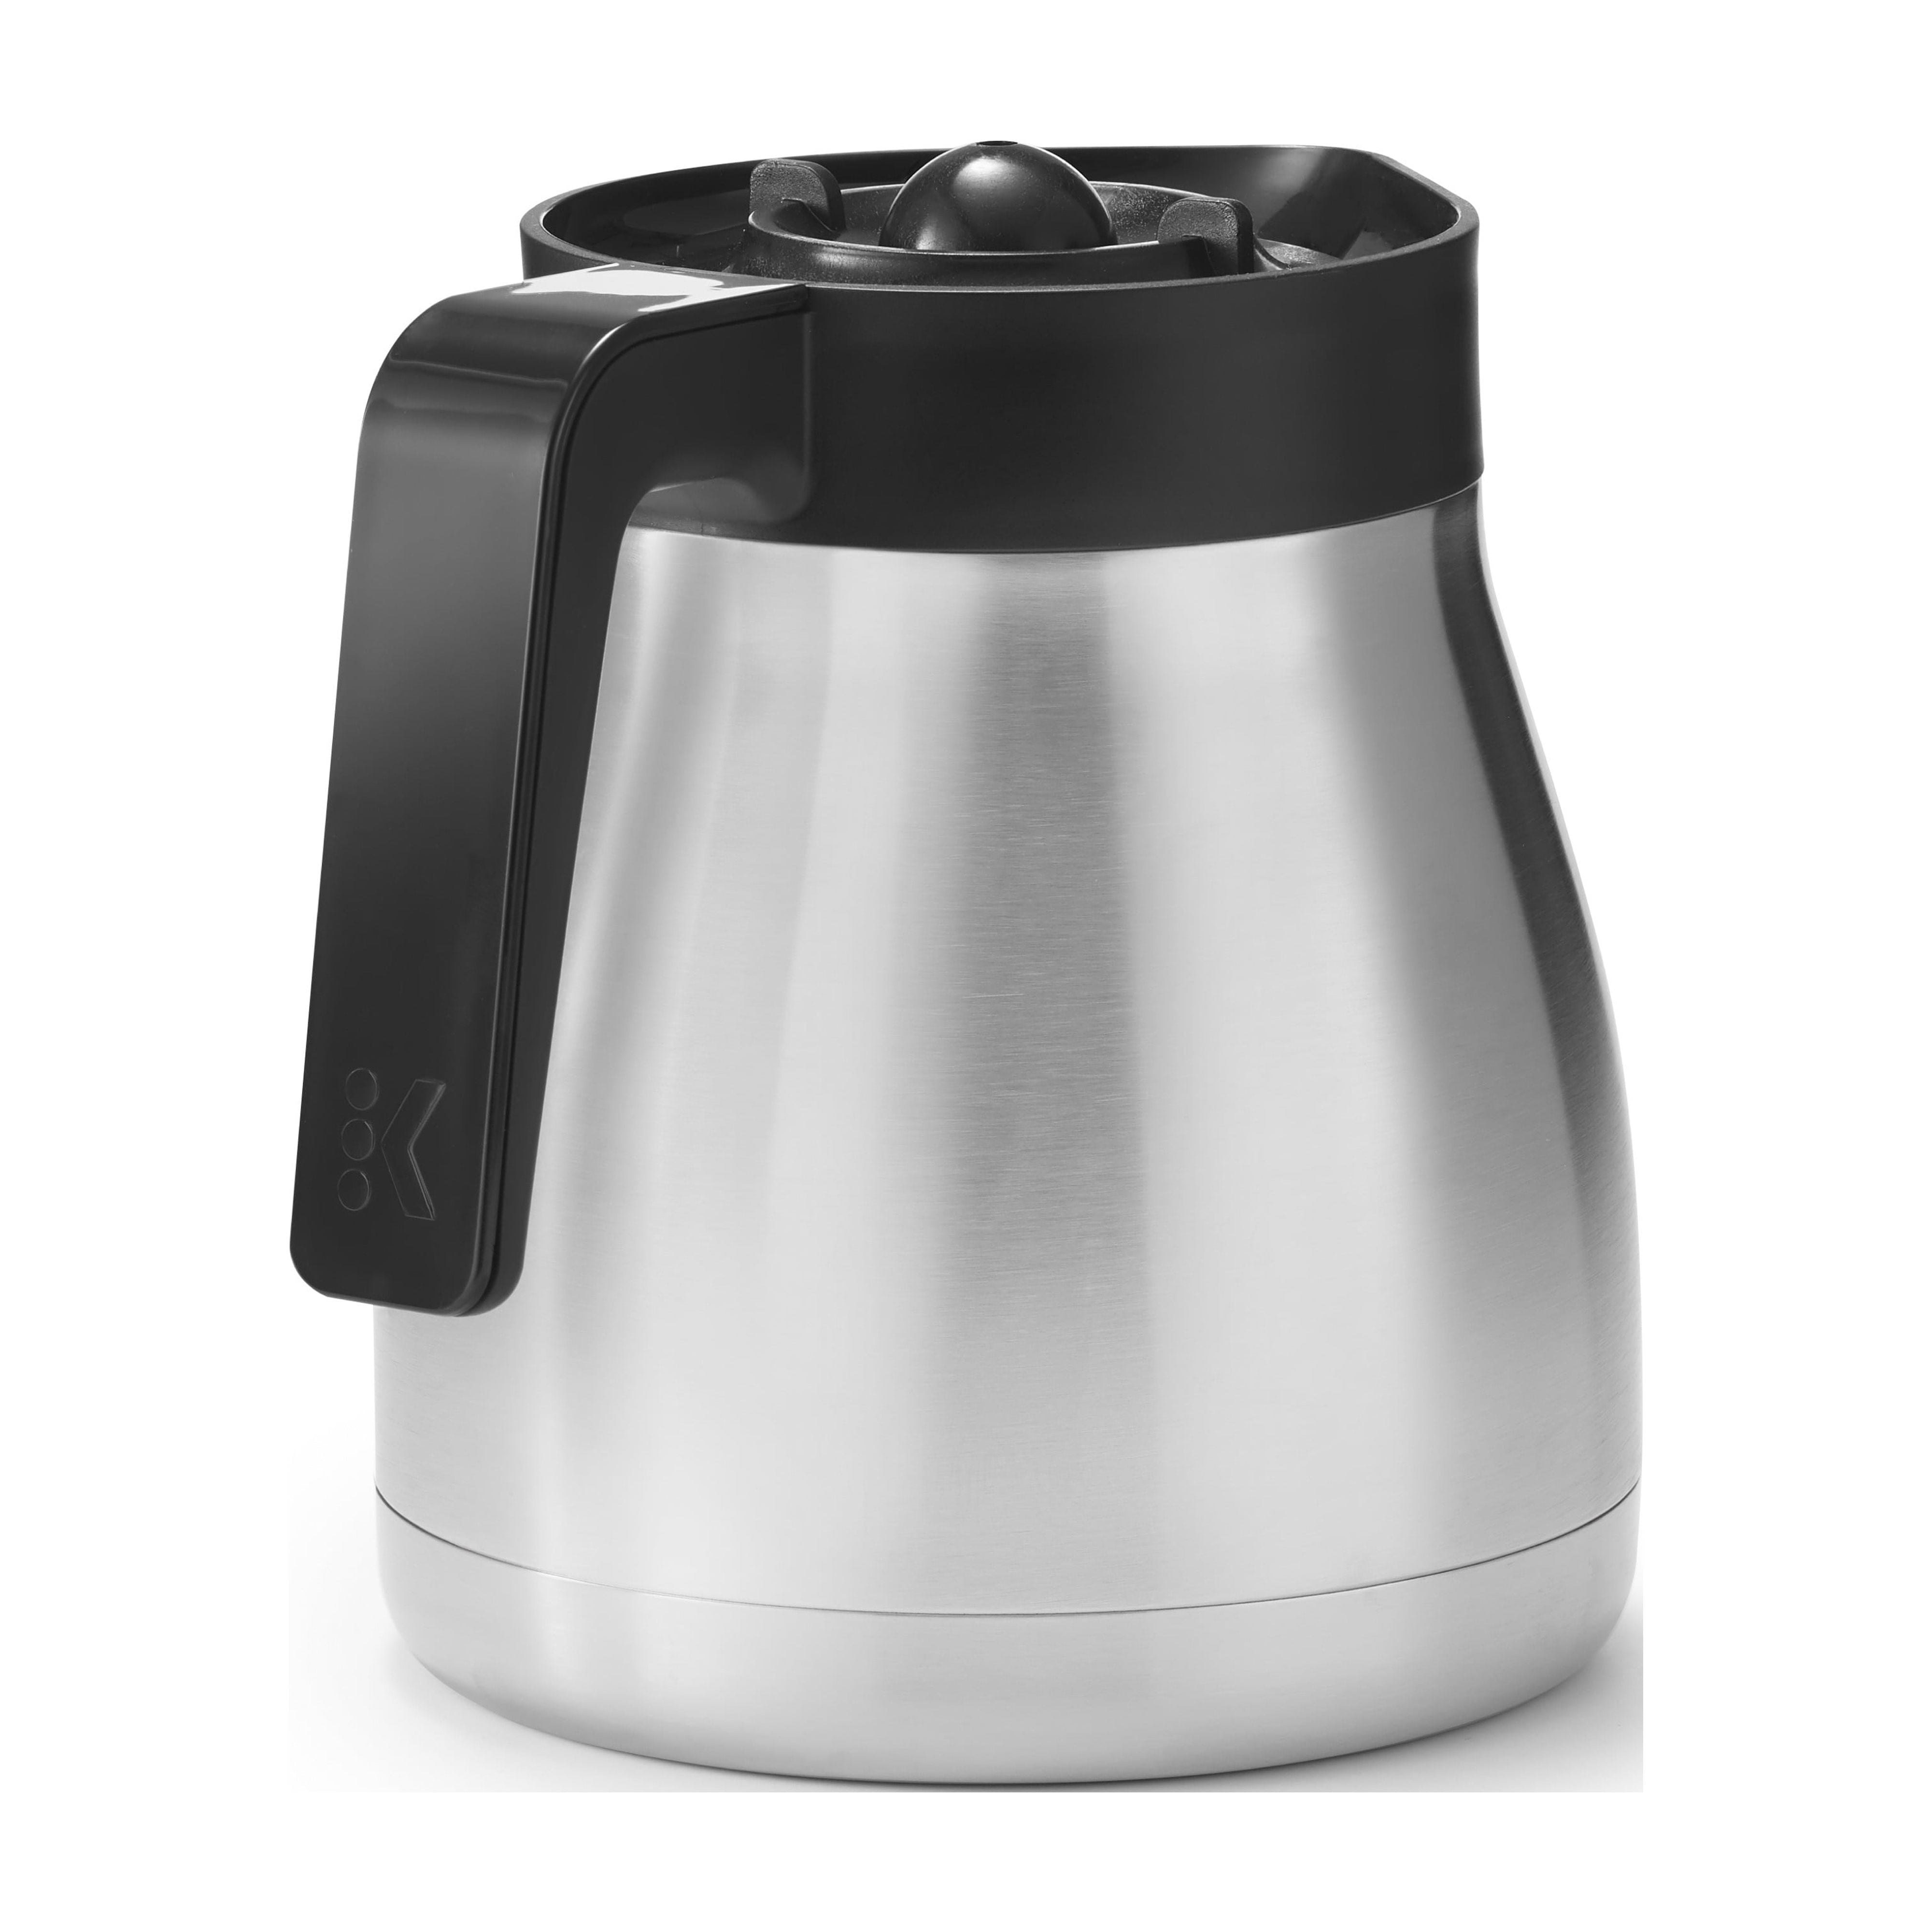 Keurig Stainless Steel Thermal Carafe, Exclusively Compatible with K-Duo Plus Coffee Brewer, Silver Finish